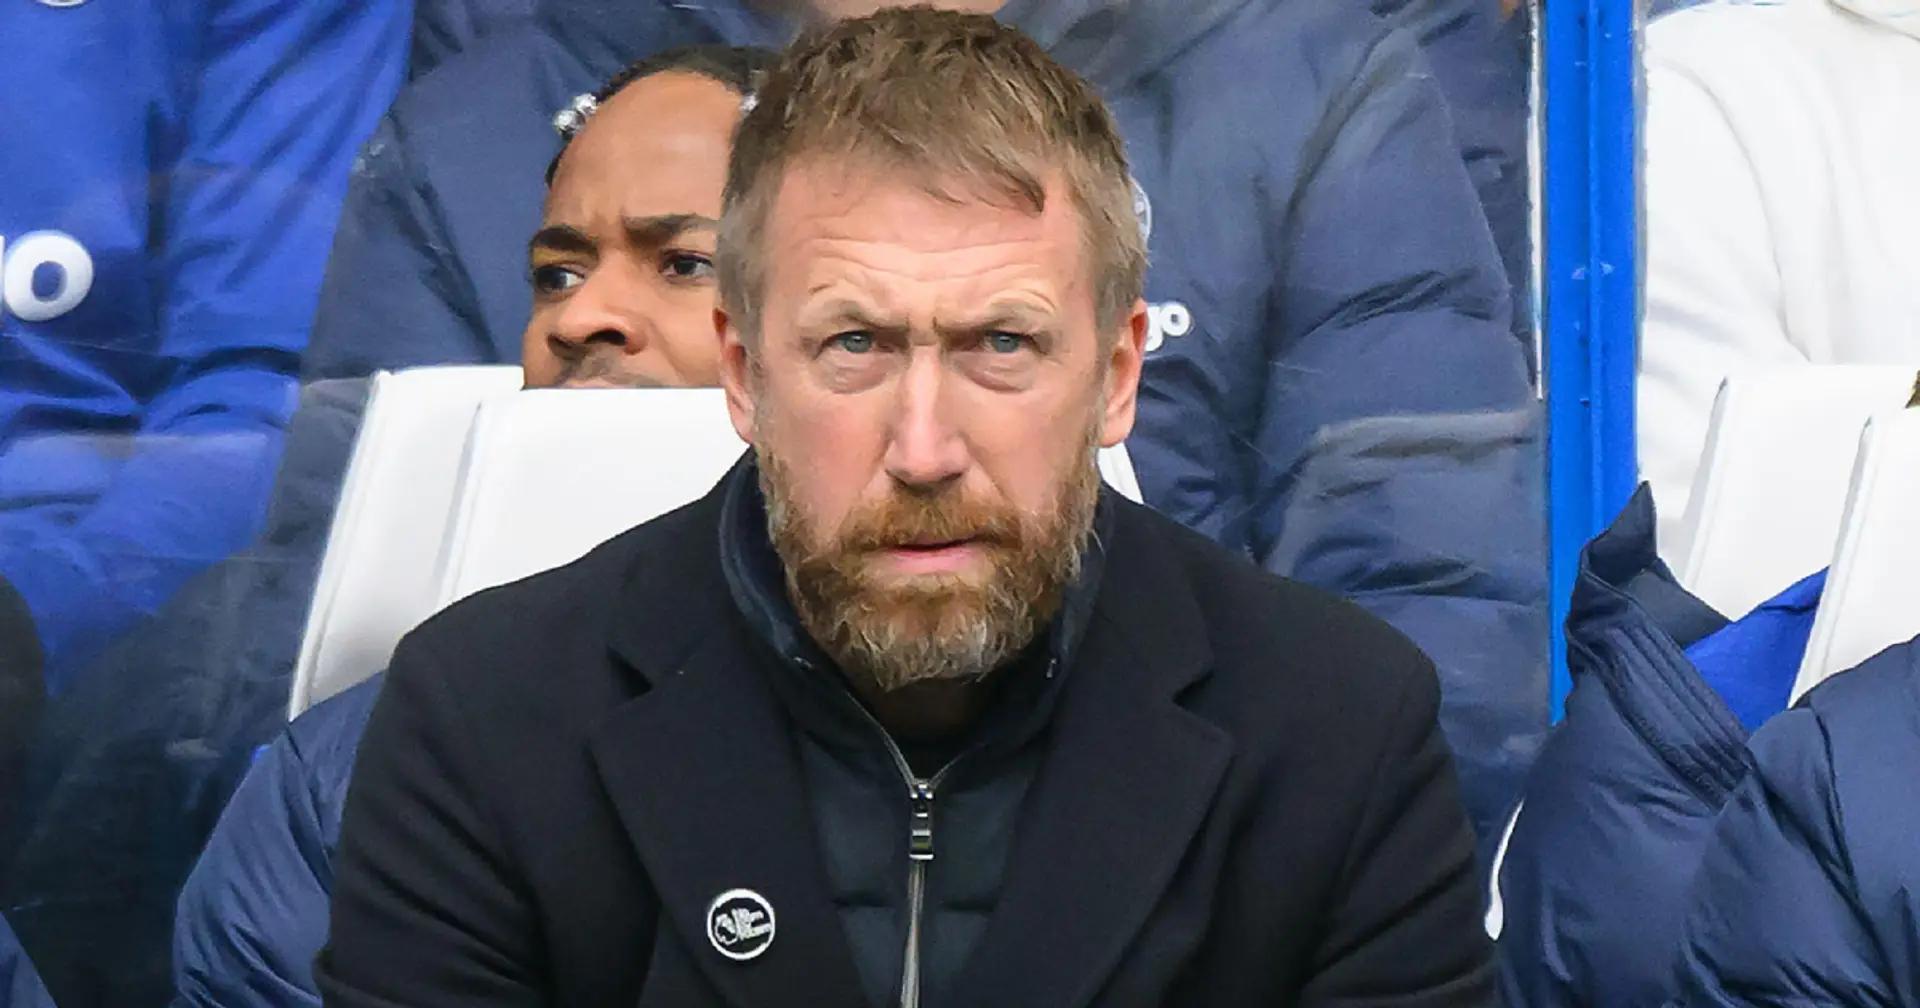 Graham Potter could take charge at Man United on two conditions (reliability: 3 stars)